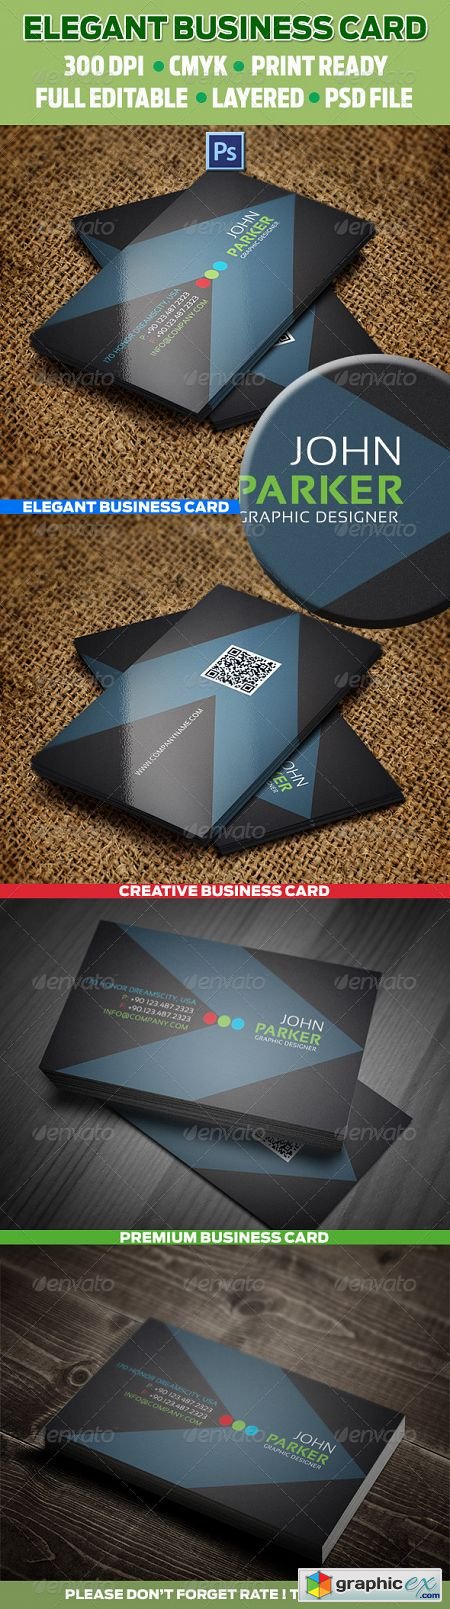 Creative Business Cards 21 - 3553605